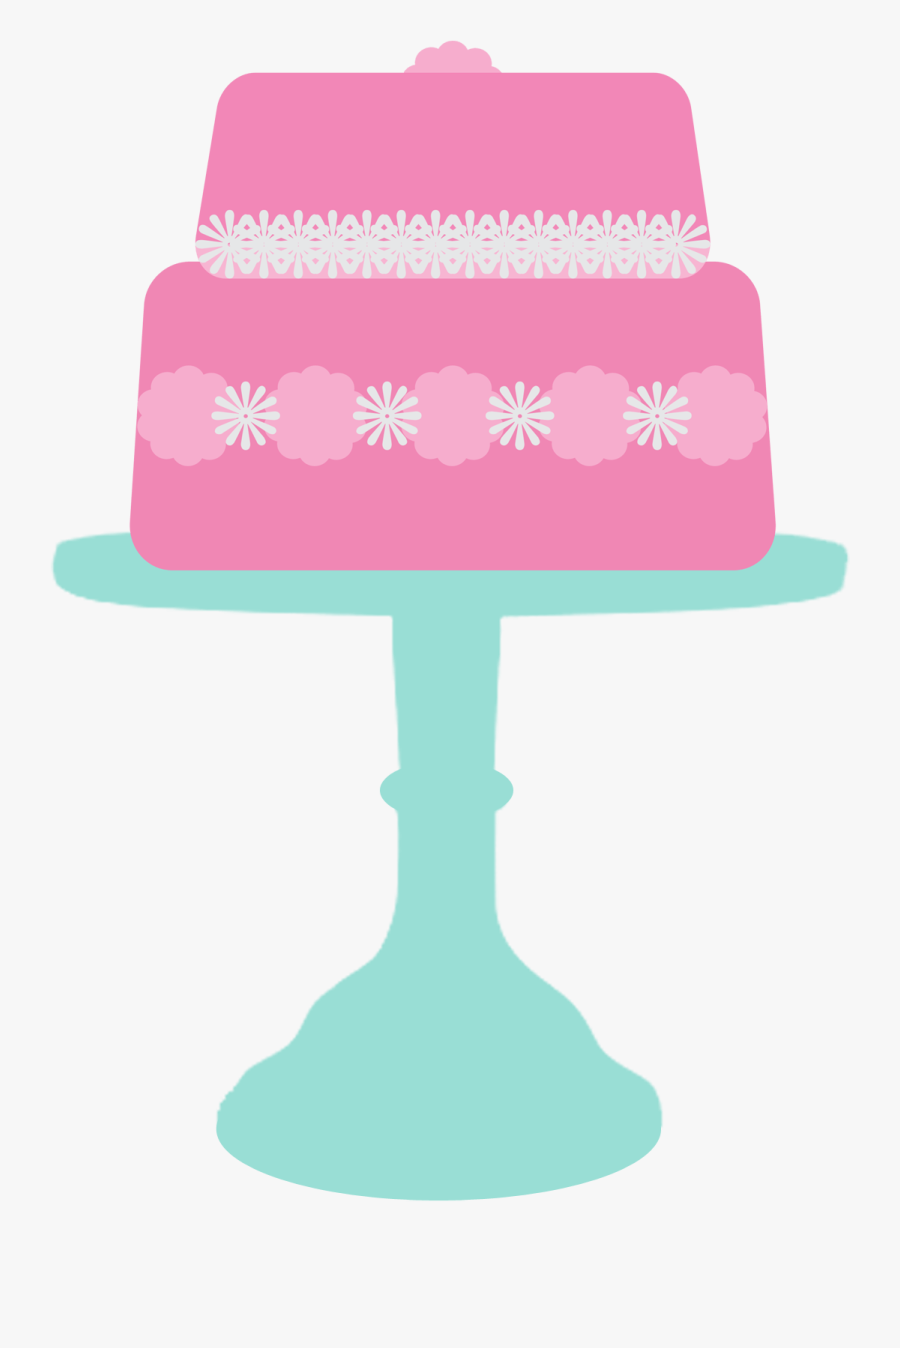 Cake Clipart Download Free - Cake Stand Clip Art, Transparent Clipart